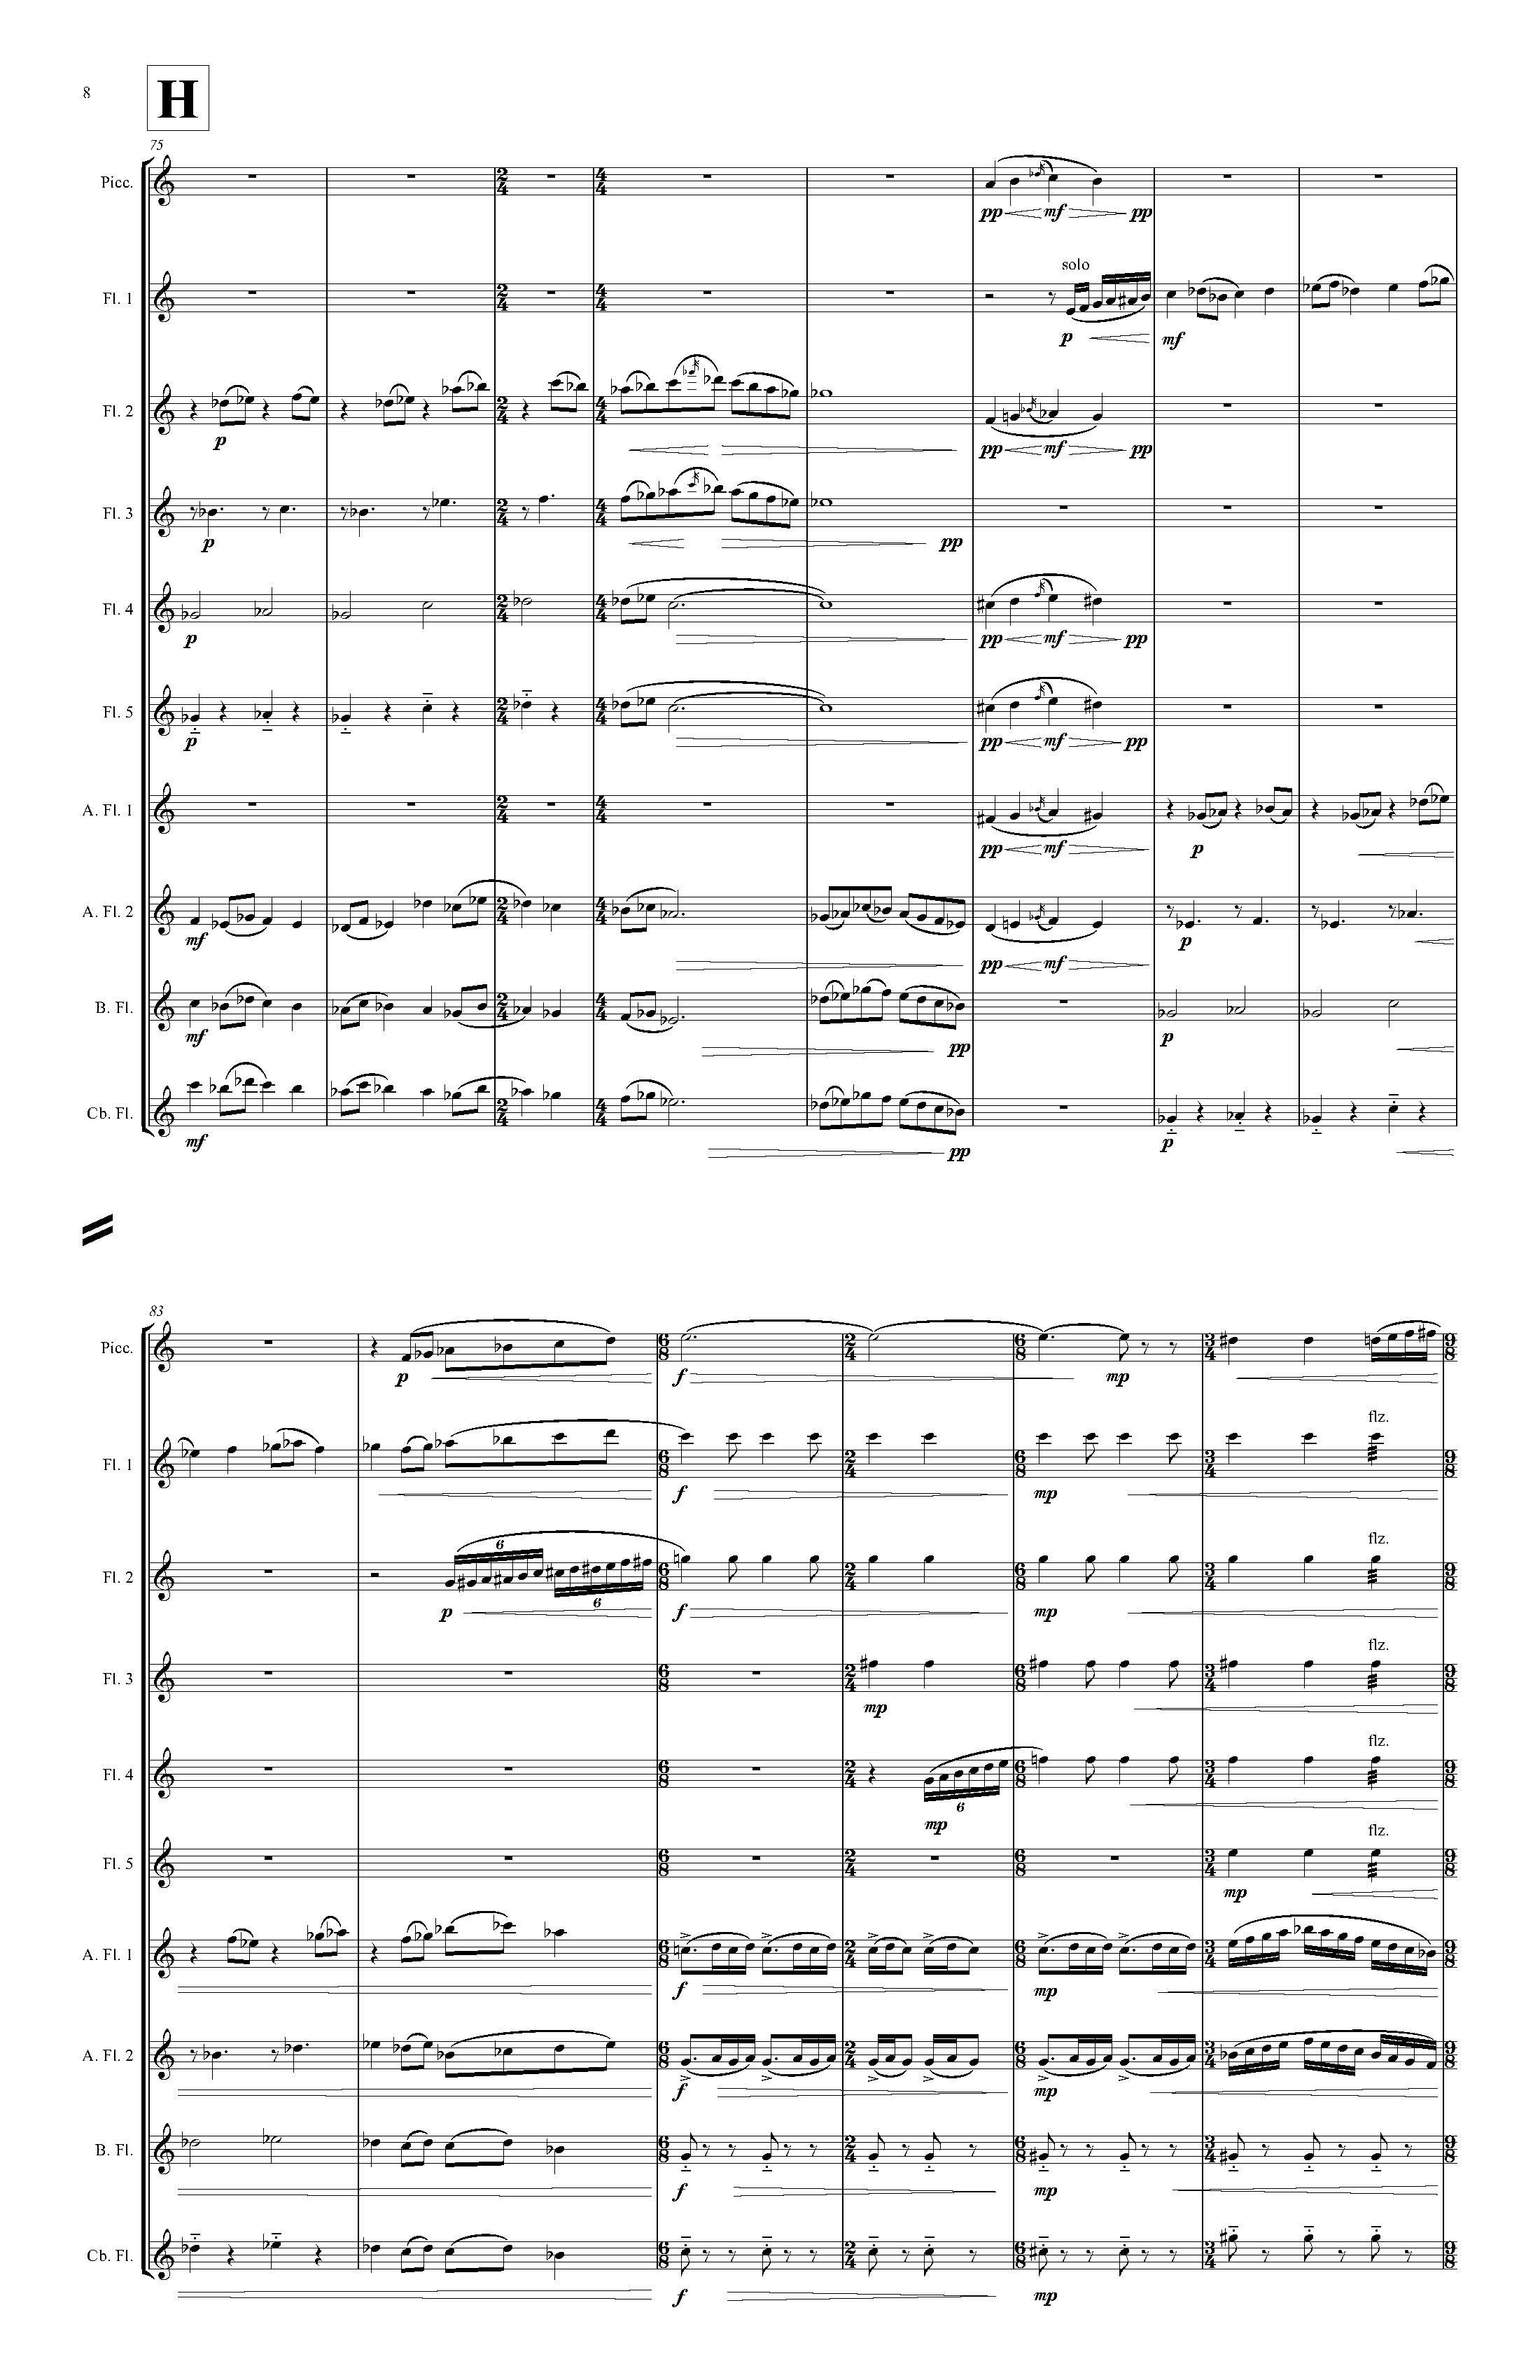 PIPES - Complete Score_Page_14.jpg